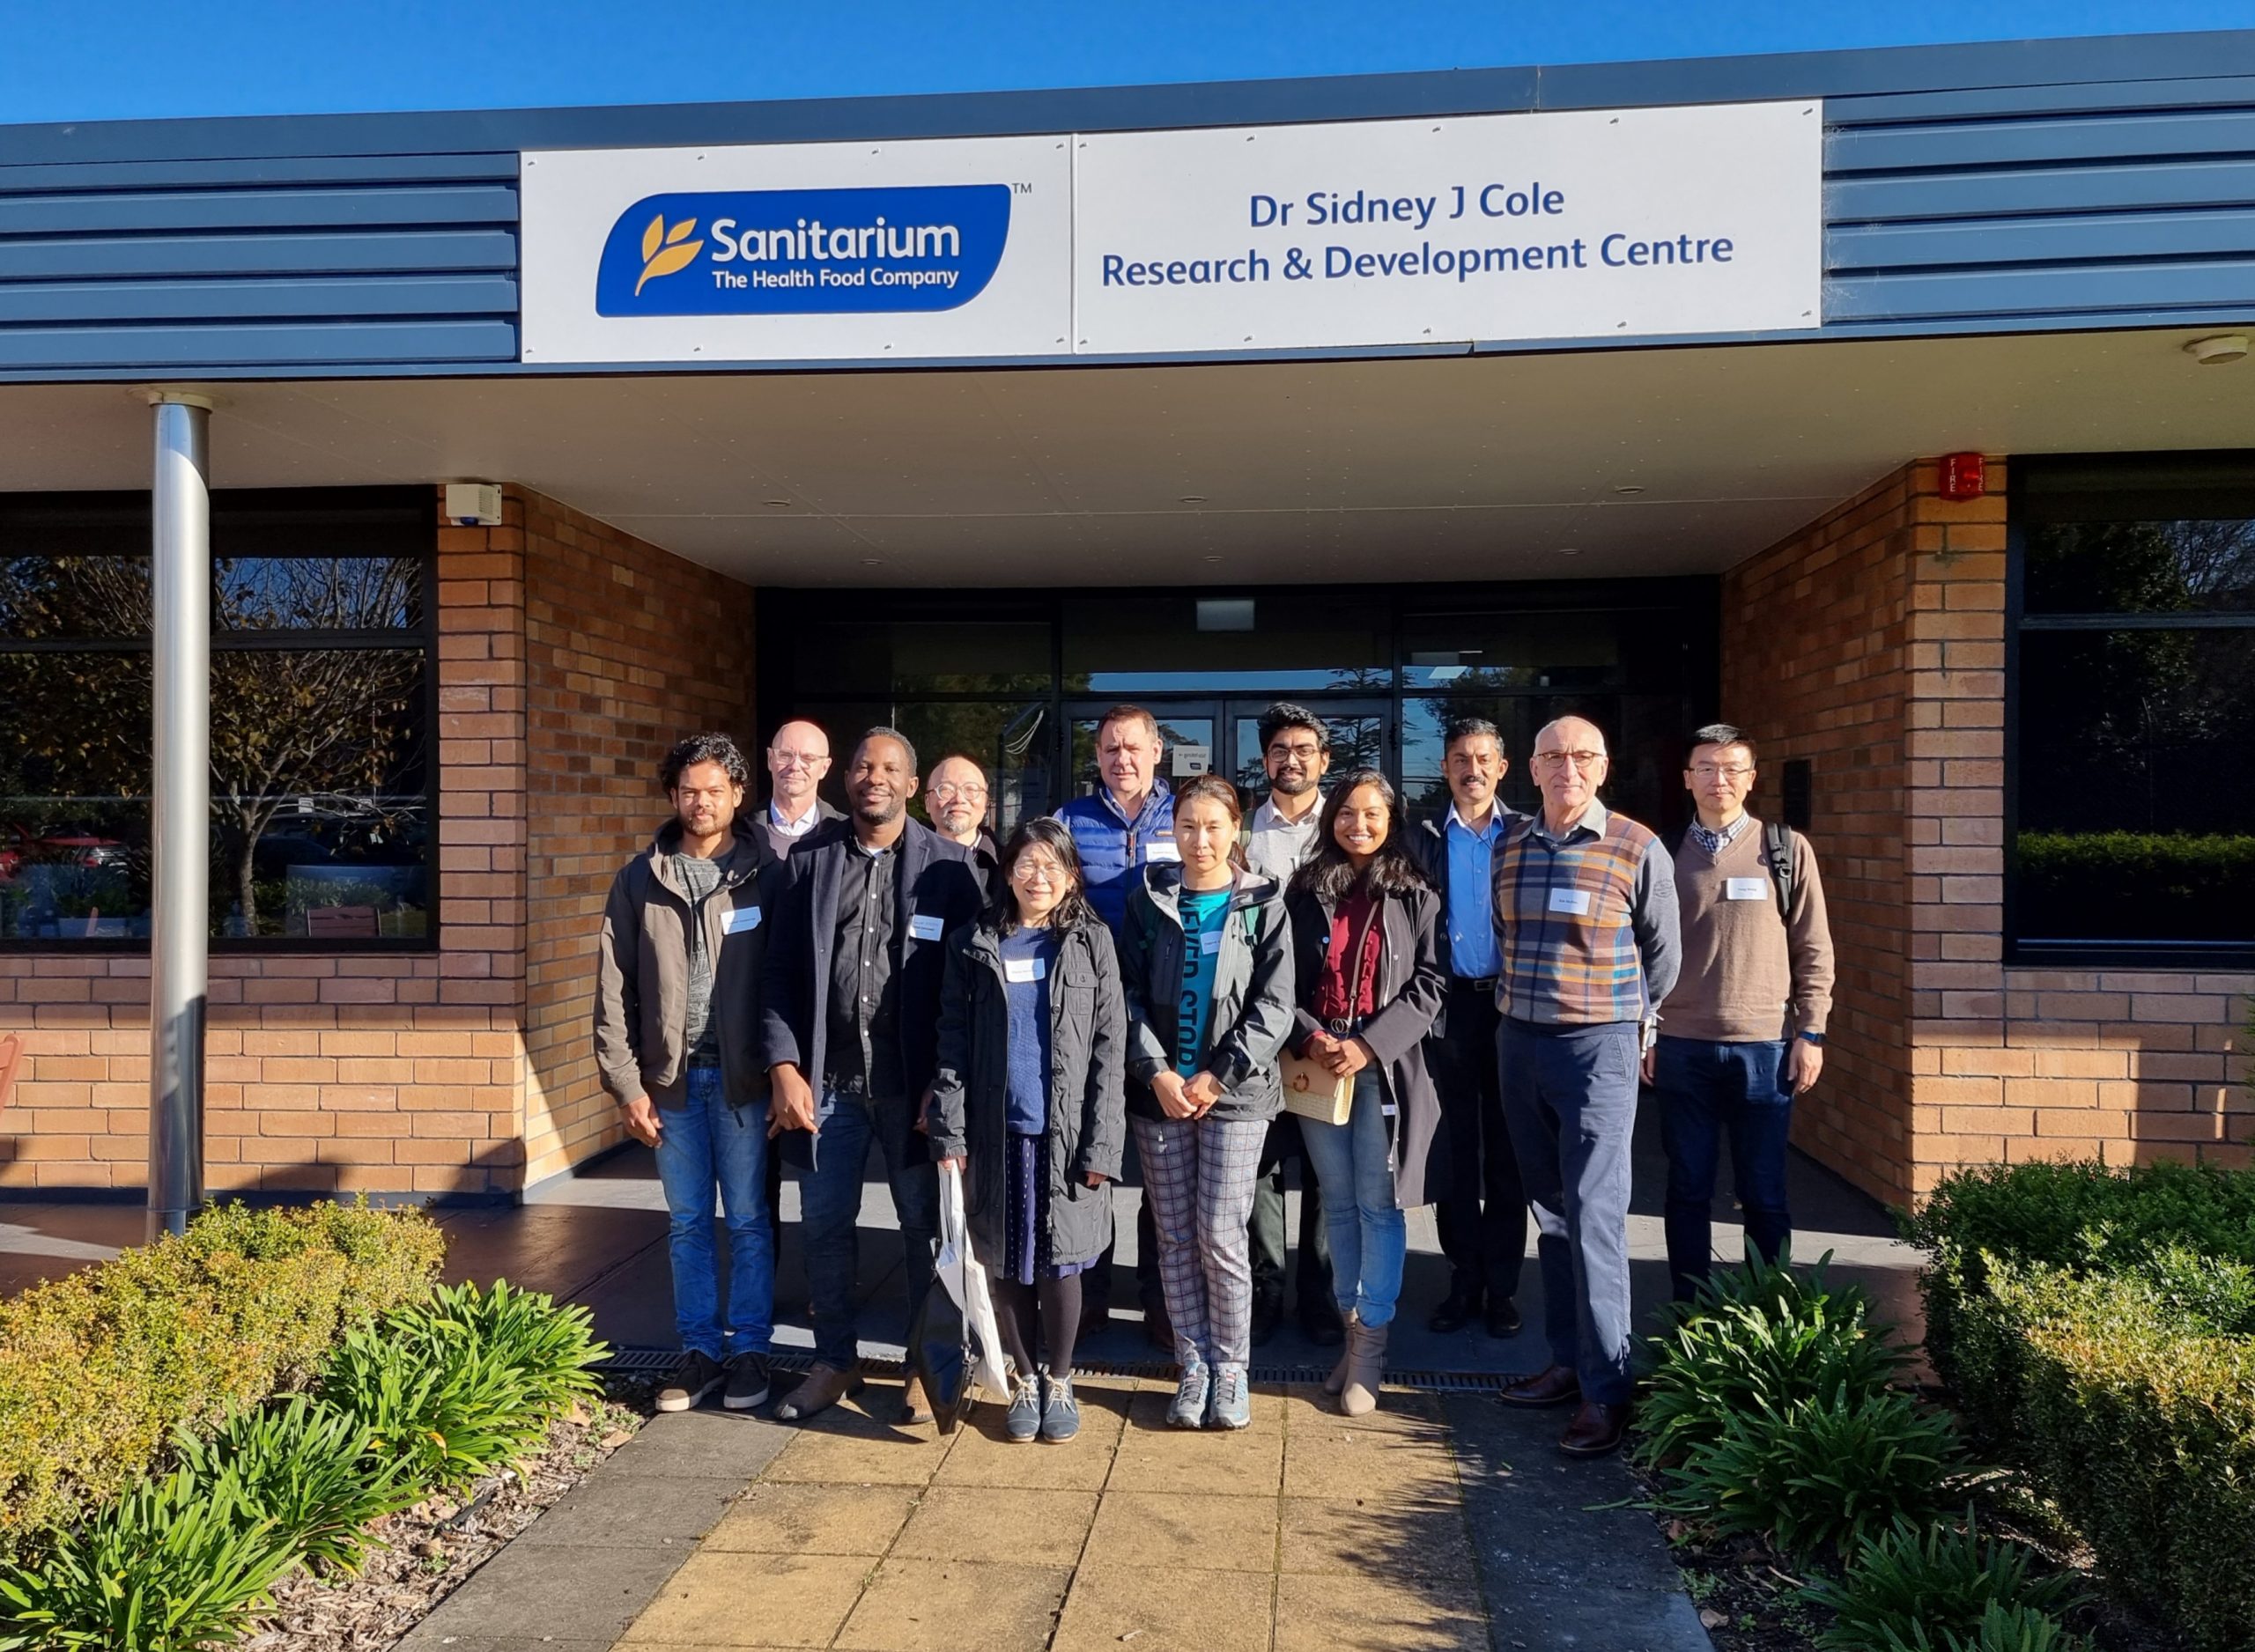 Fifteen members of the CRC cohort joined a recent daytrip to visit industry partner Sanitarium’s research facility on NSW's Central Coast.